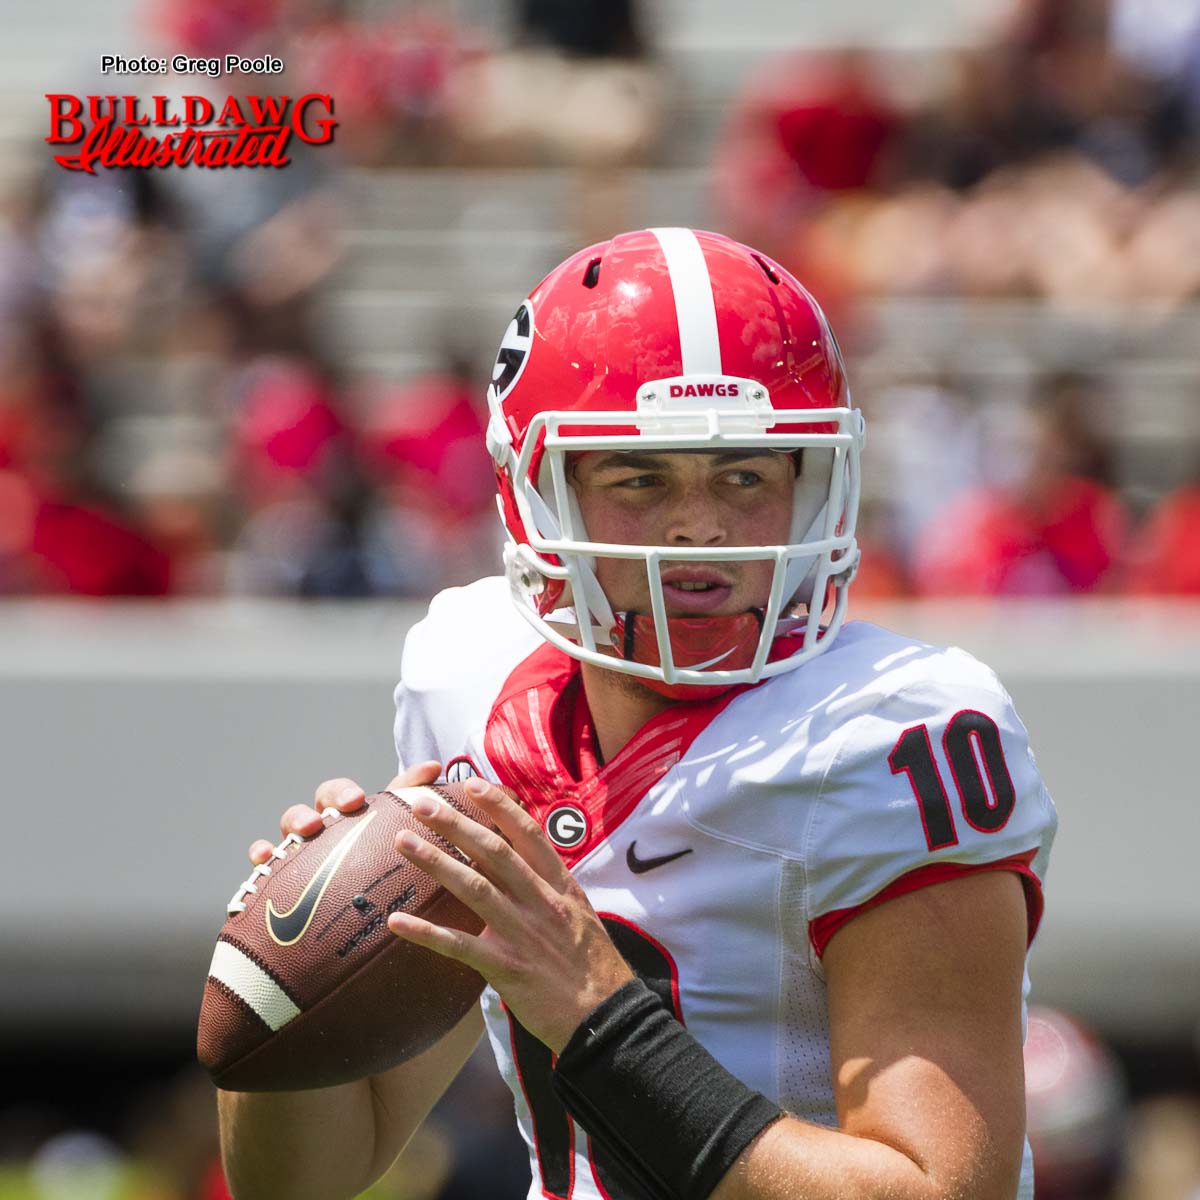 Jacob Eason scans the field during Georgia's 2017 G-Day spring game